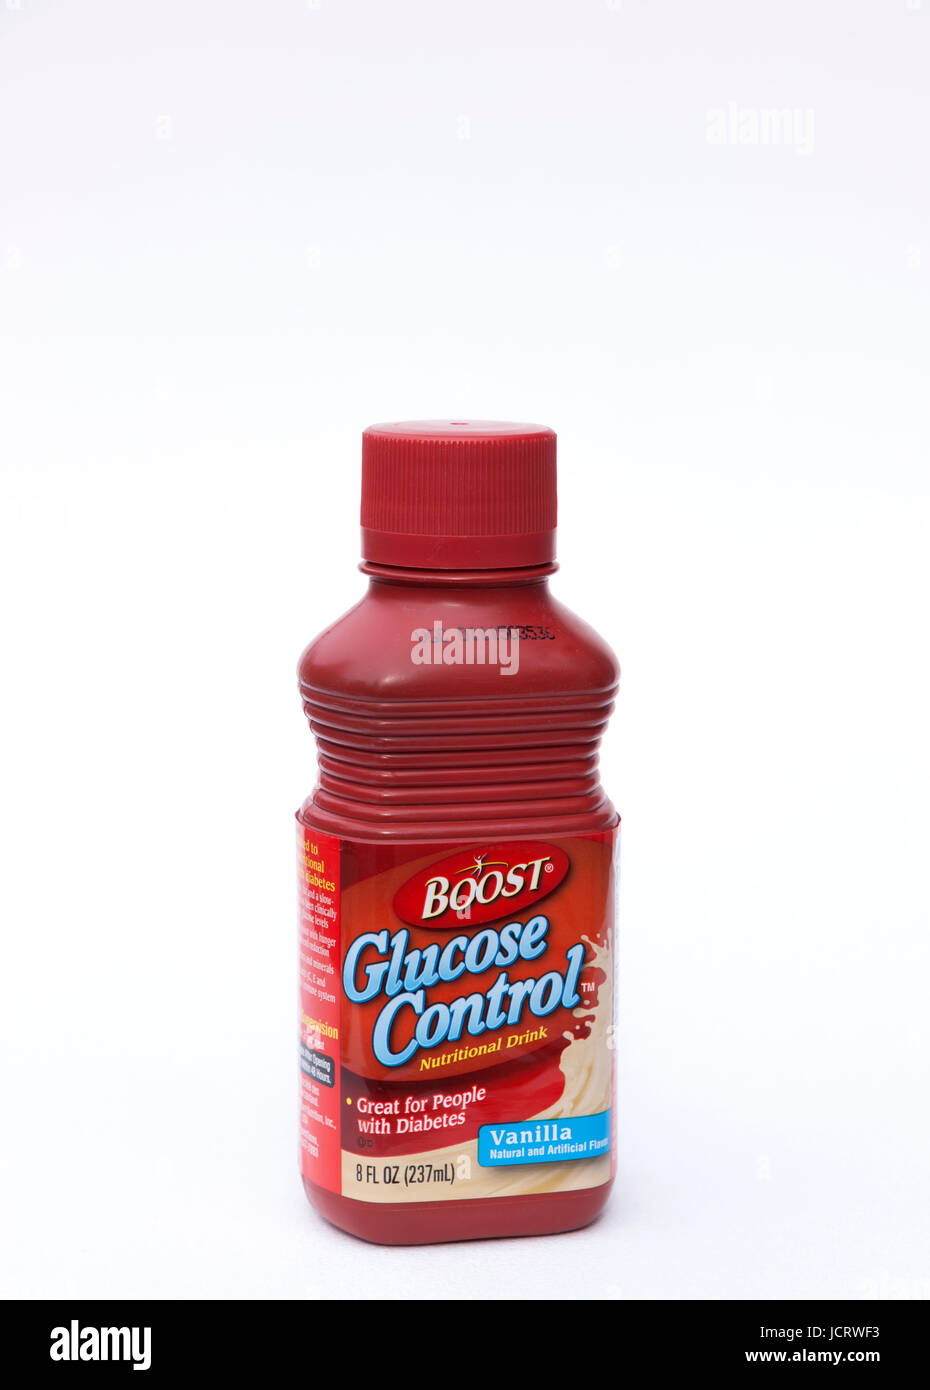 Boost Glucose Control Nutritional Drink. Stock Photo